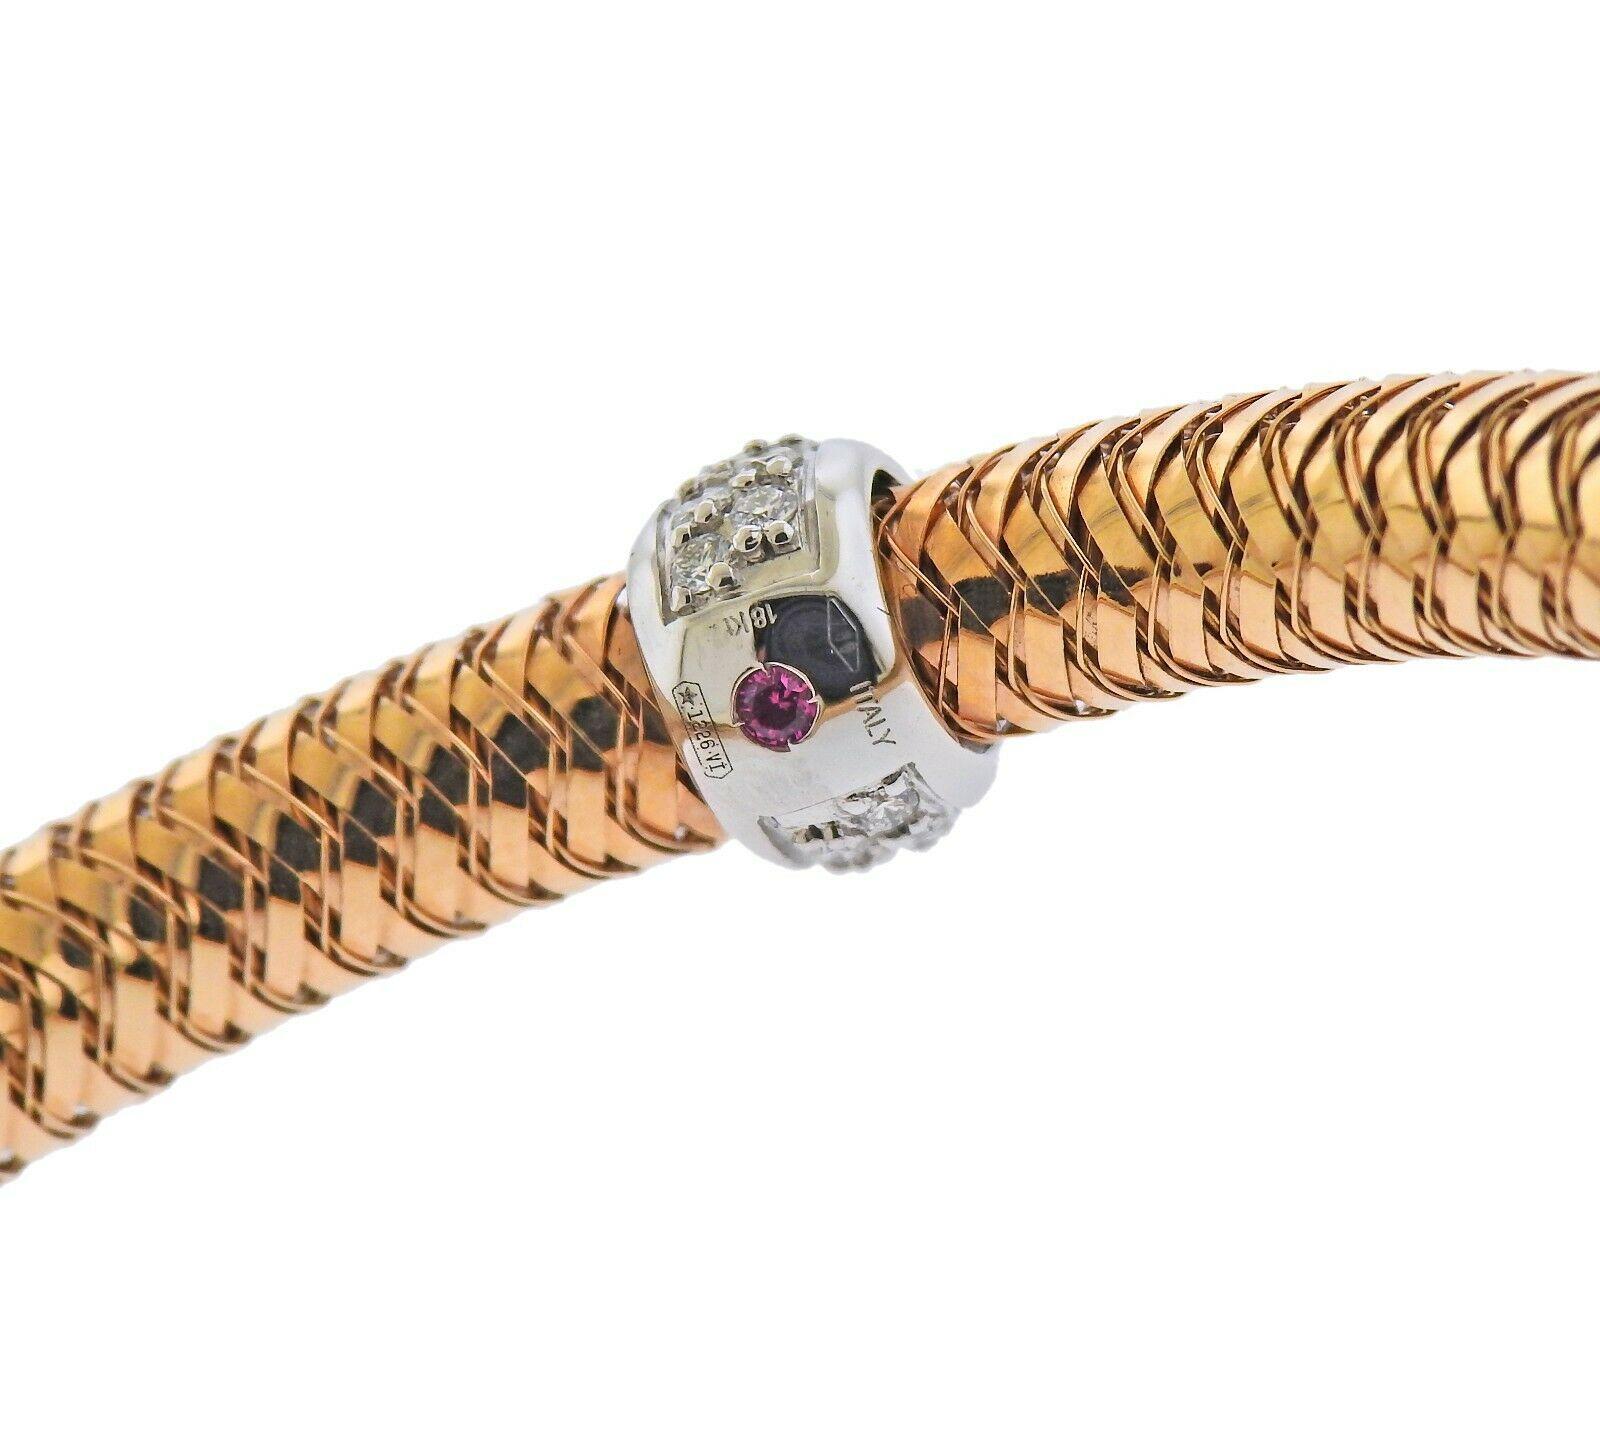 New 18k rose and white gold Primavera flexible bracelet by Roberto Coin, with approx.0.22ctw in G/VS diamonds. Retail $2300, comes with box. Bracelet will fit approx. 7